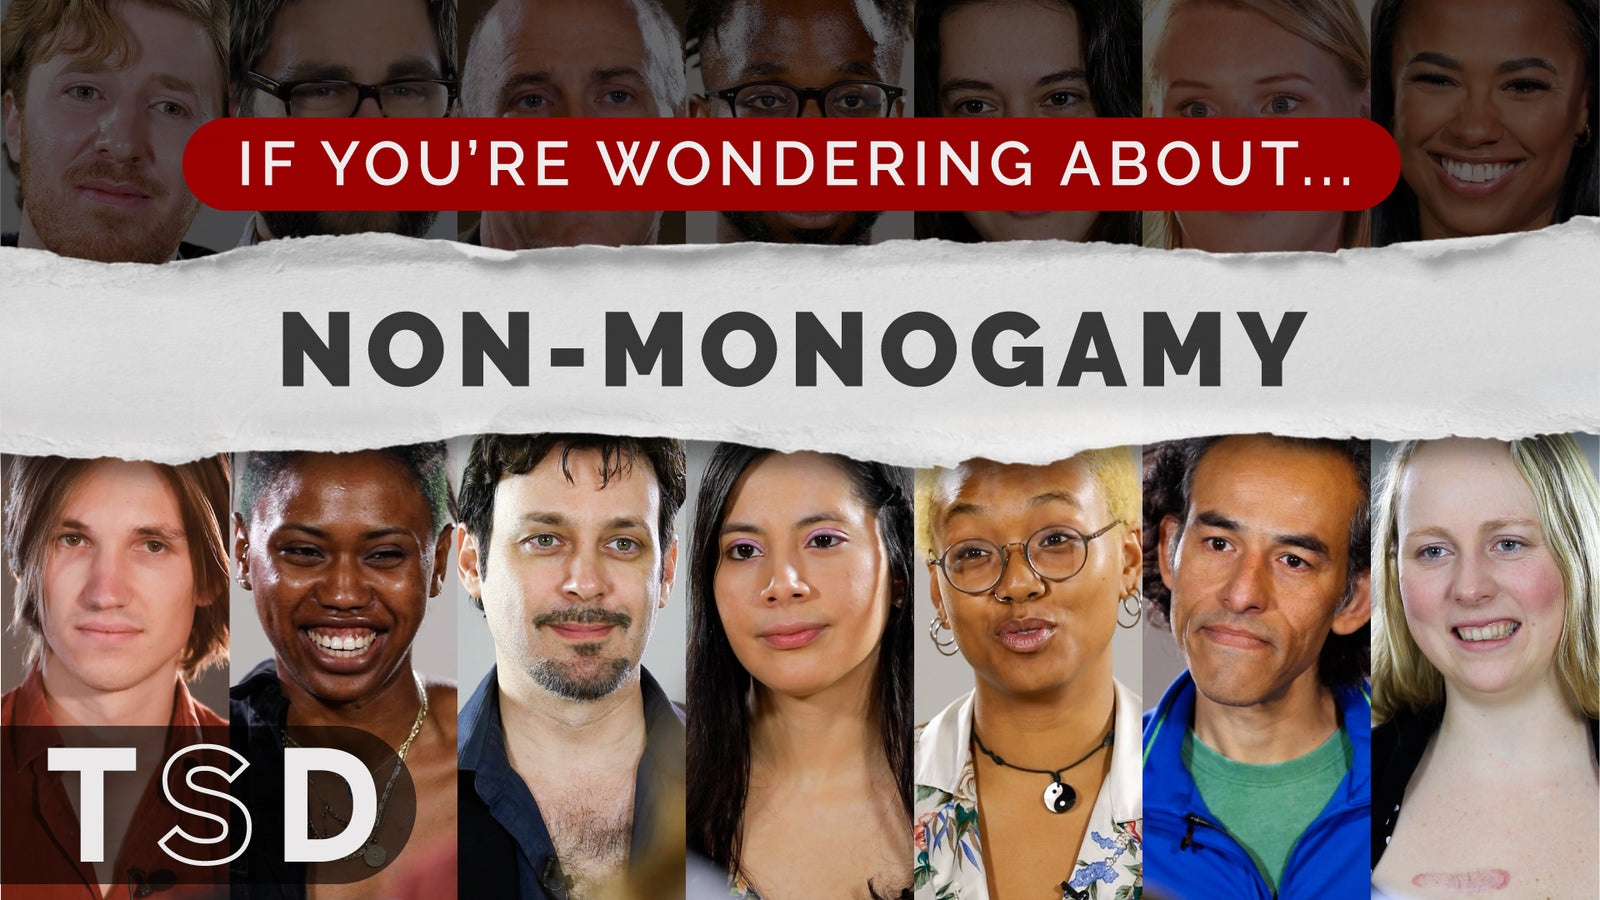 [VIDEO] If You're Wondering About Non-Monogamy